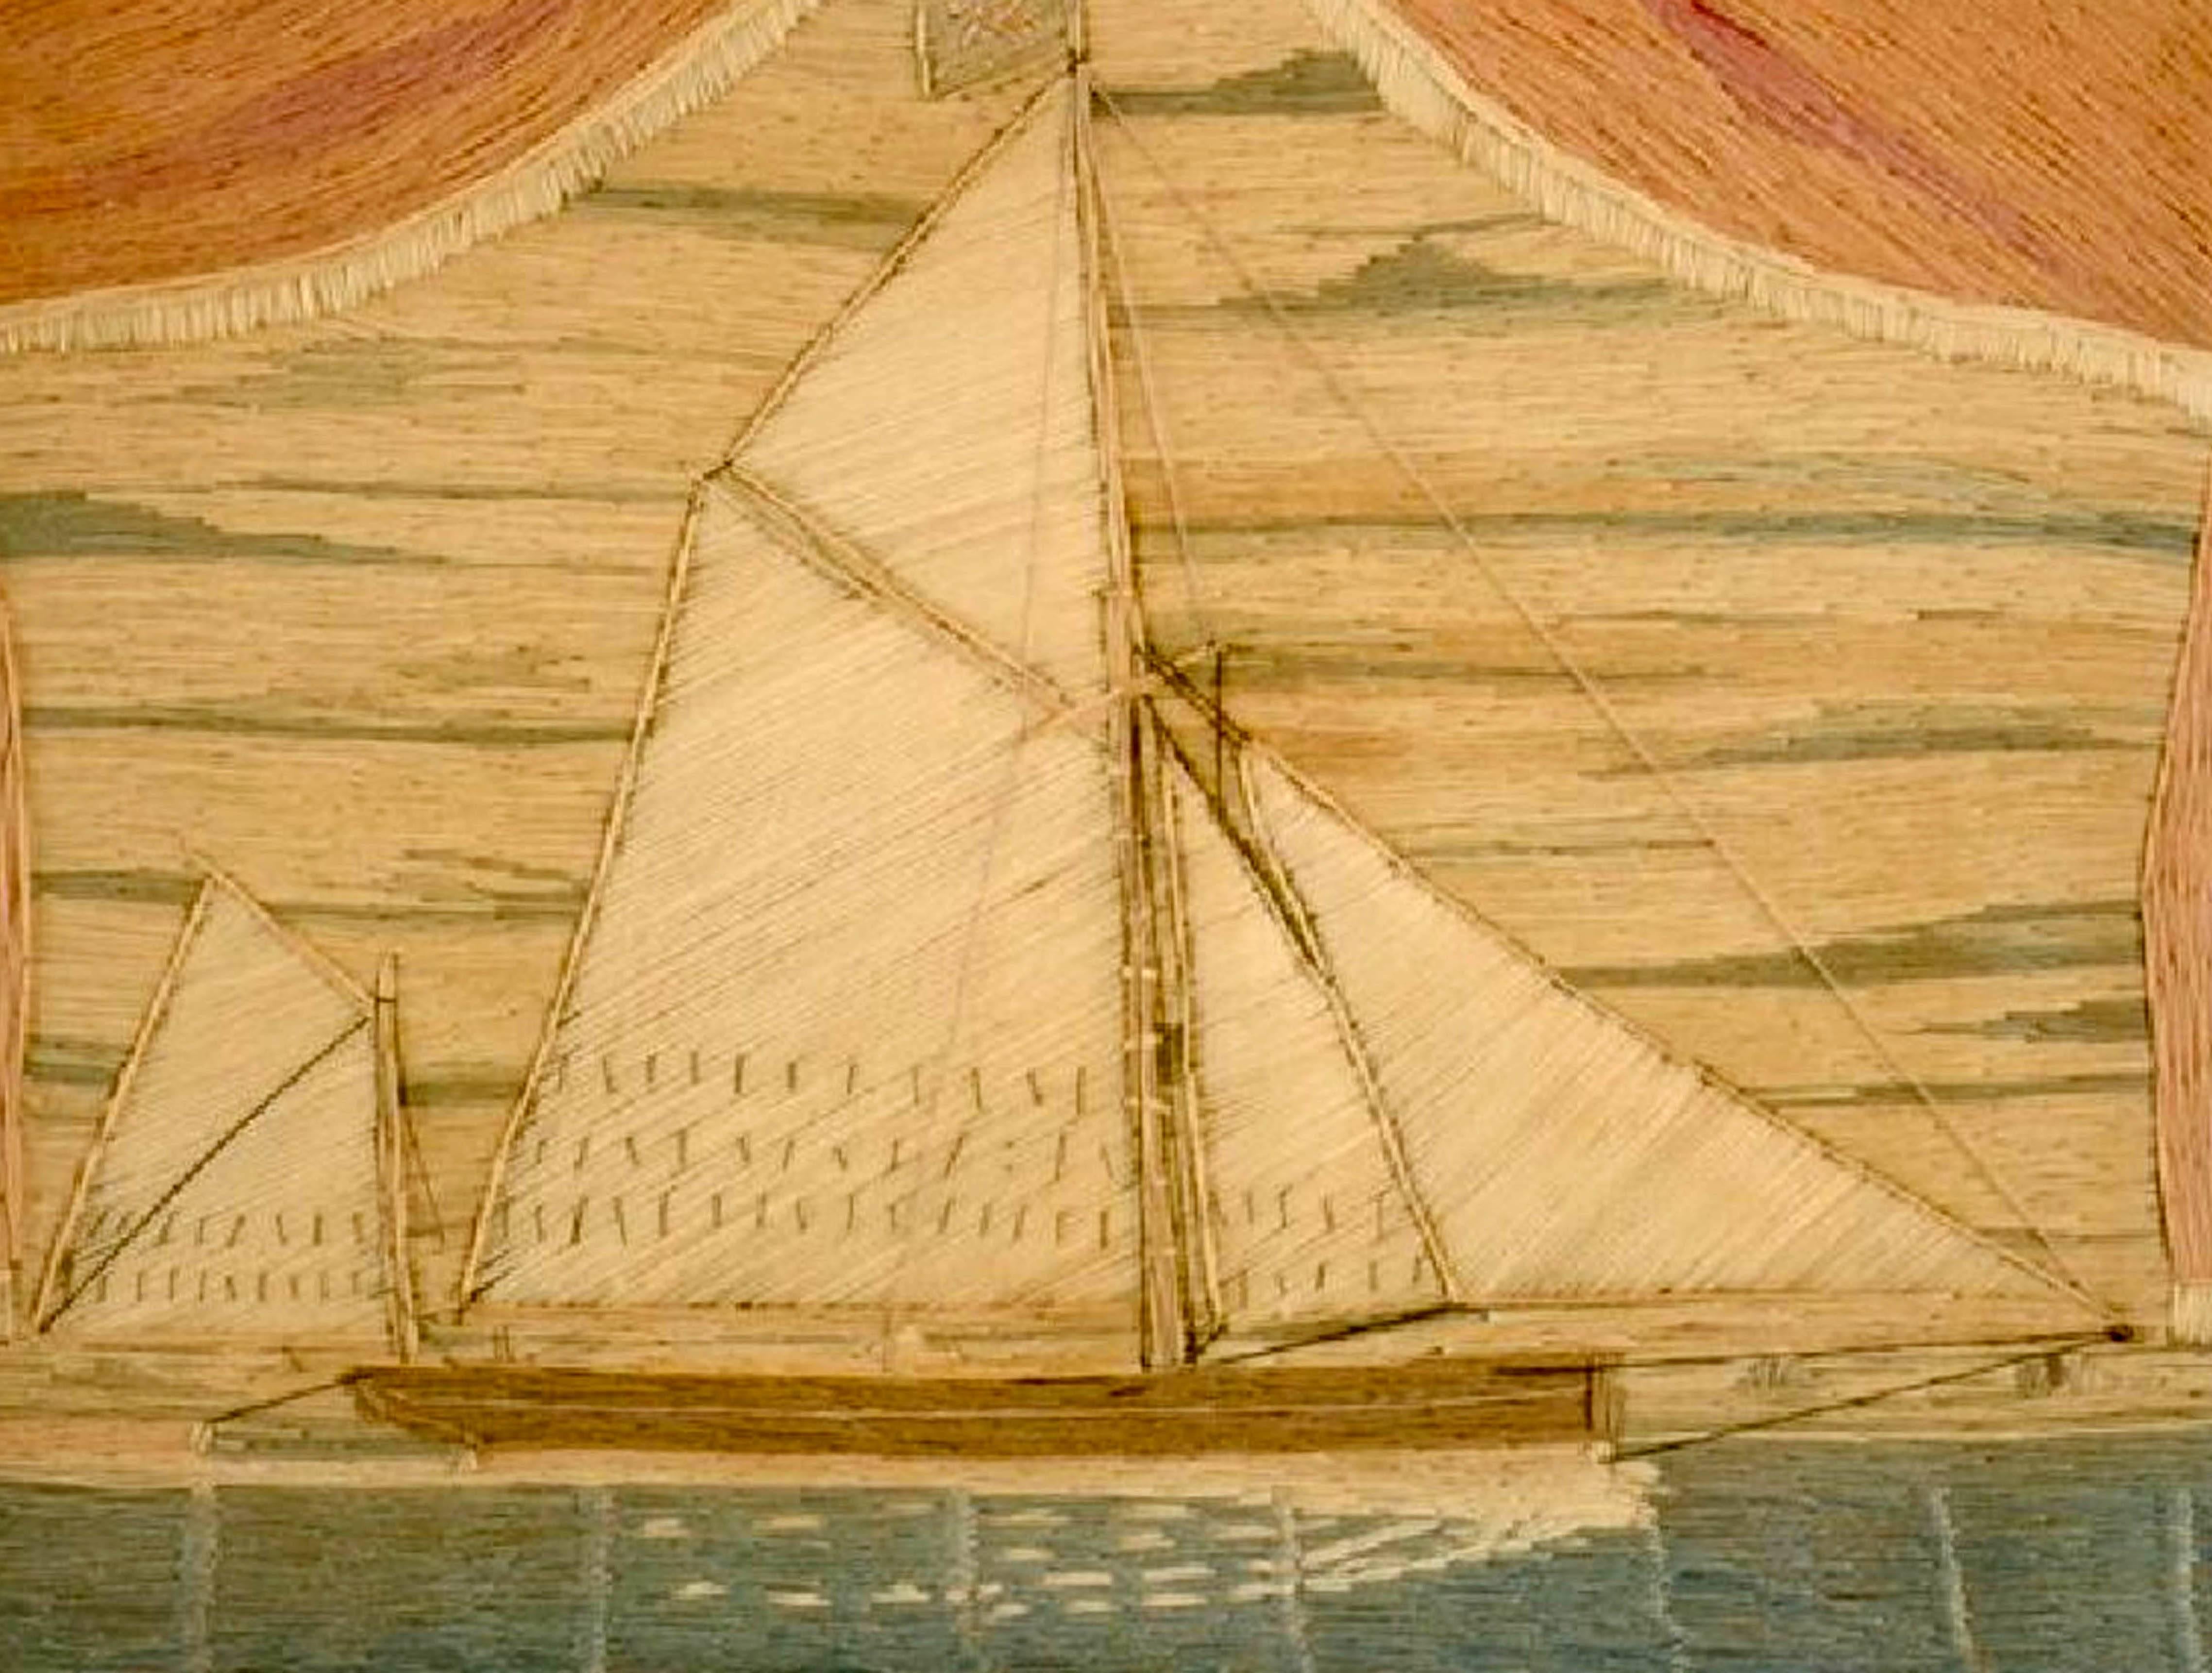 British sailor's woolwork of a bowsprit Thames barge,
circa 1870.

Charming small sailor's woolie of a double-masted ship within maple frame. The ship is most likely a Thames bowsprit barge. The ship is depicted framed below and between red